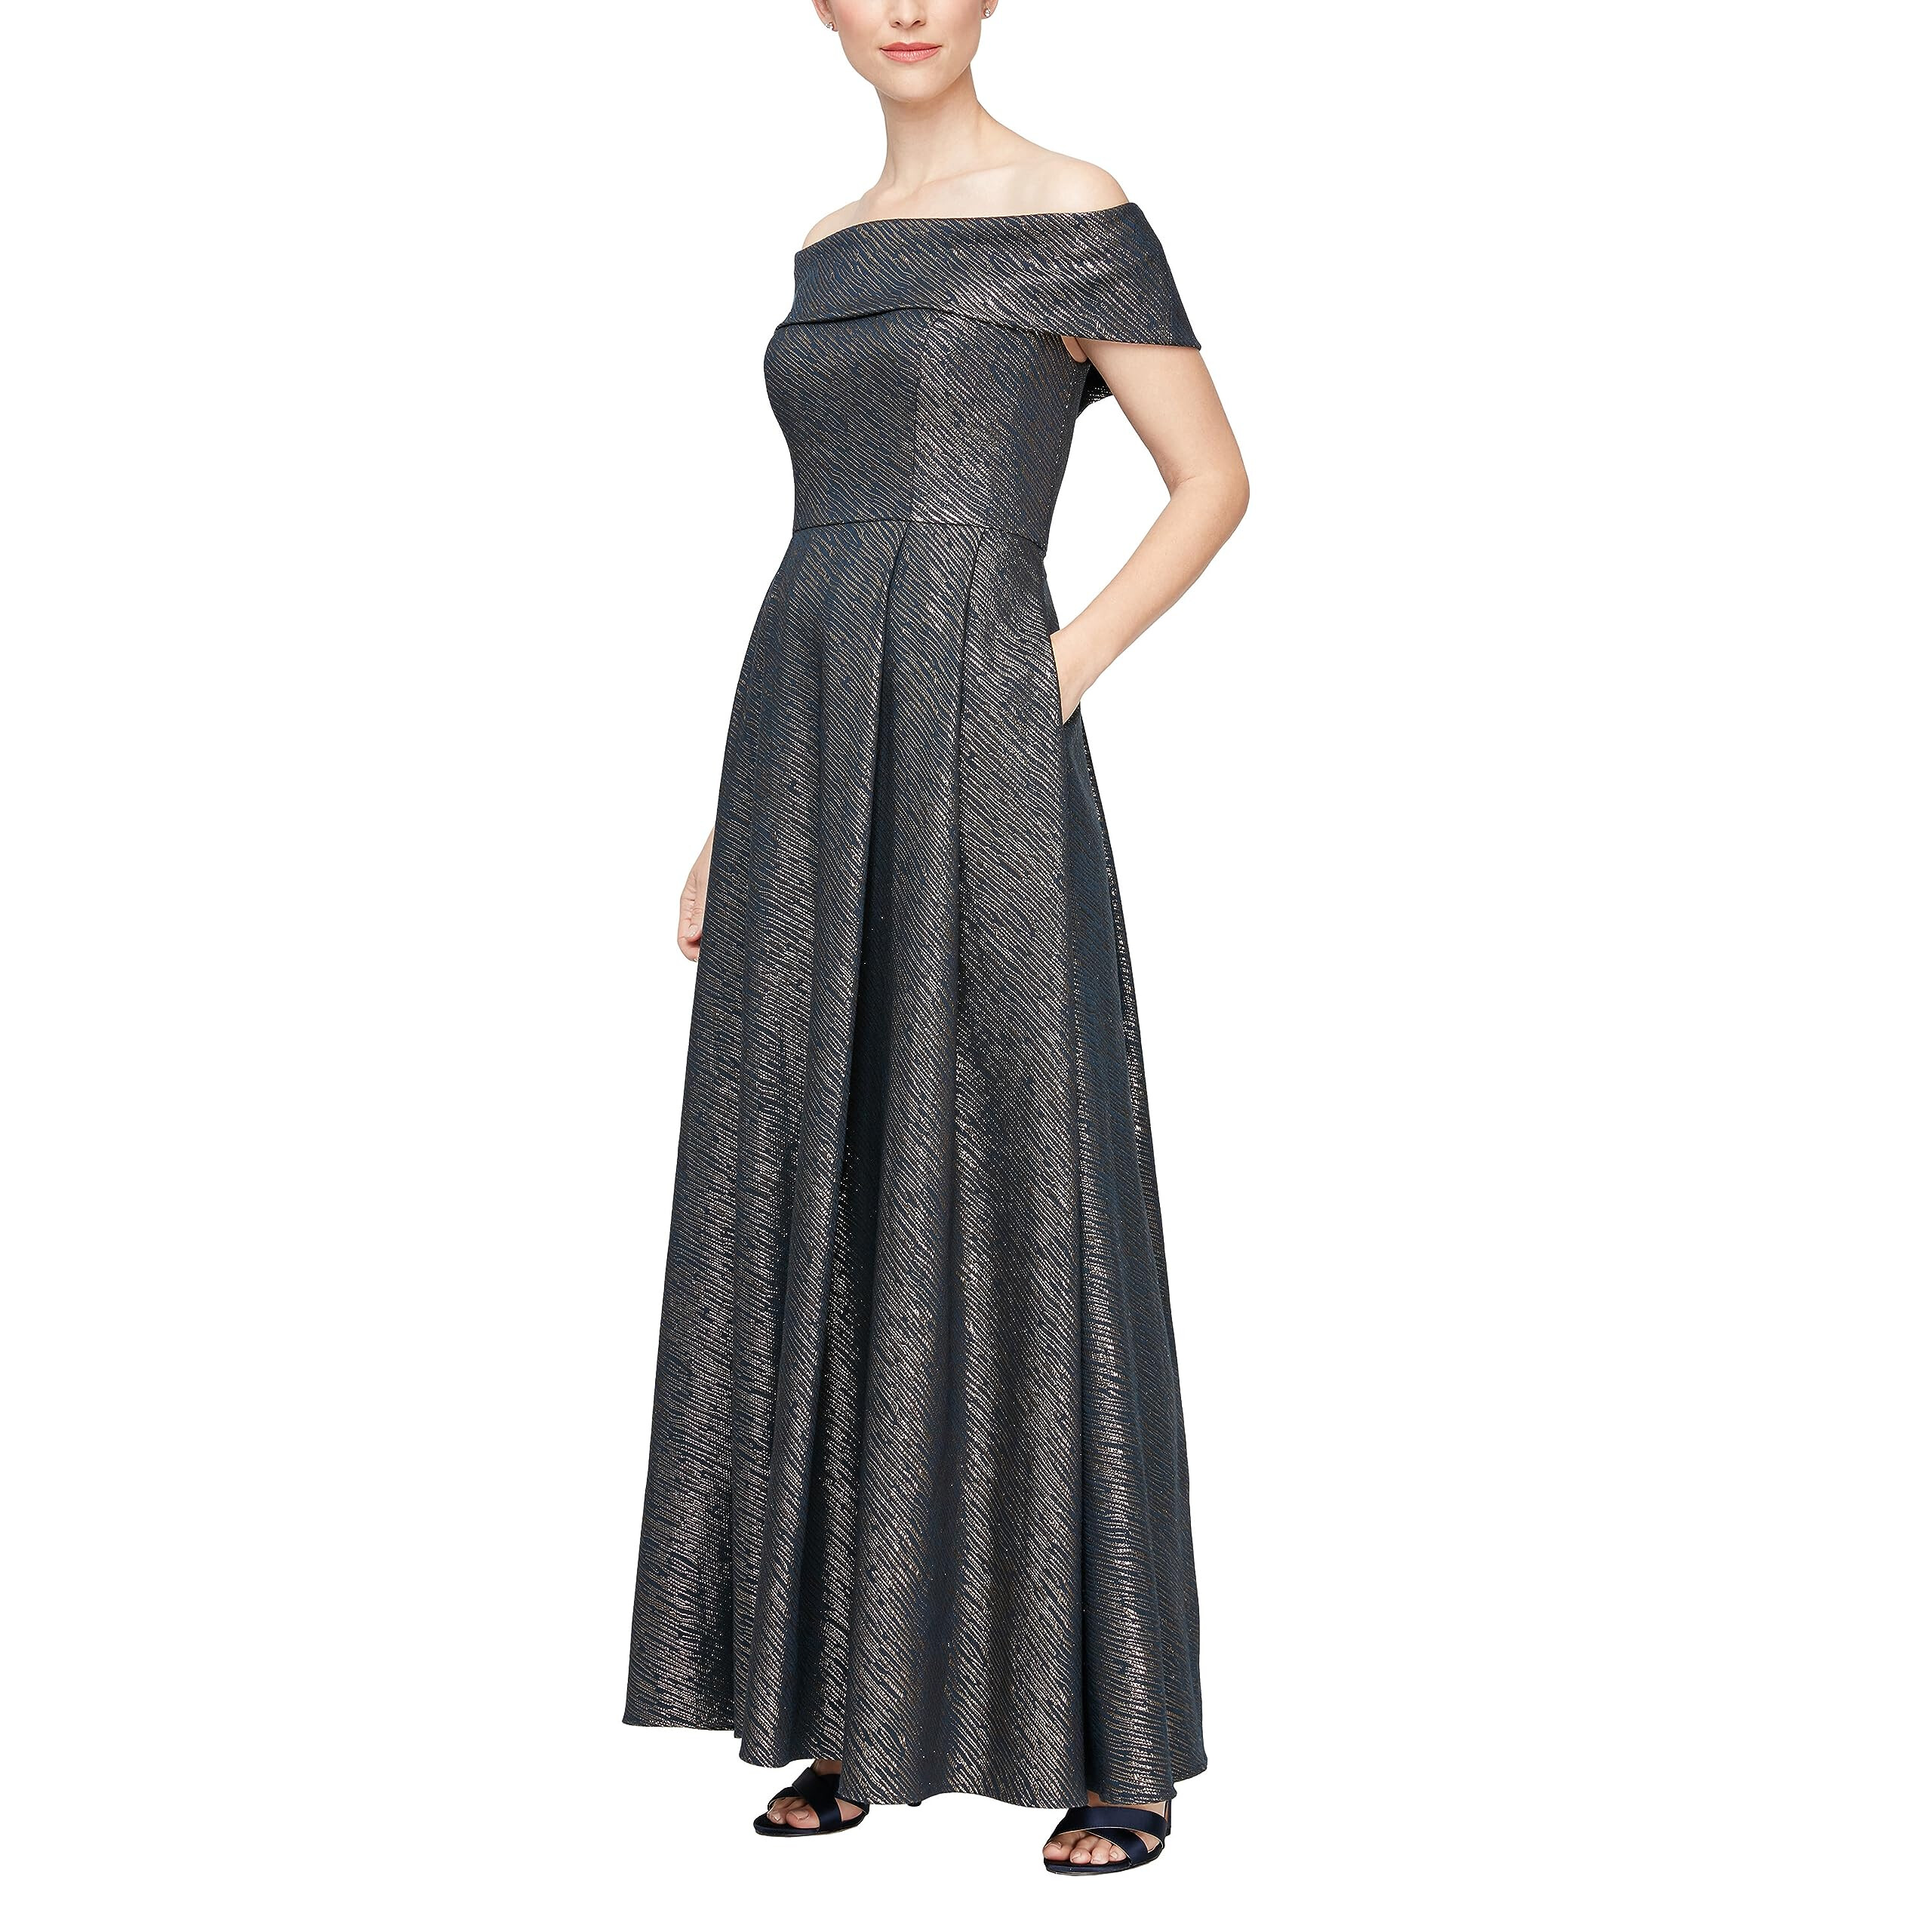 Imbracaminte Femei Alex Evenings Stretch Jacquard Off The Shoulder Ballgown with Full Skirt and Pockets Navy Gold